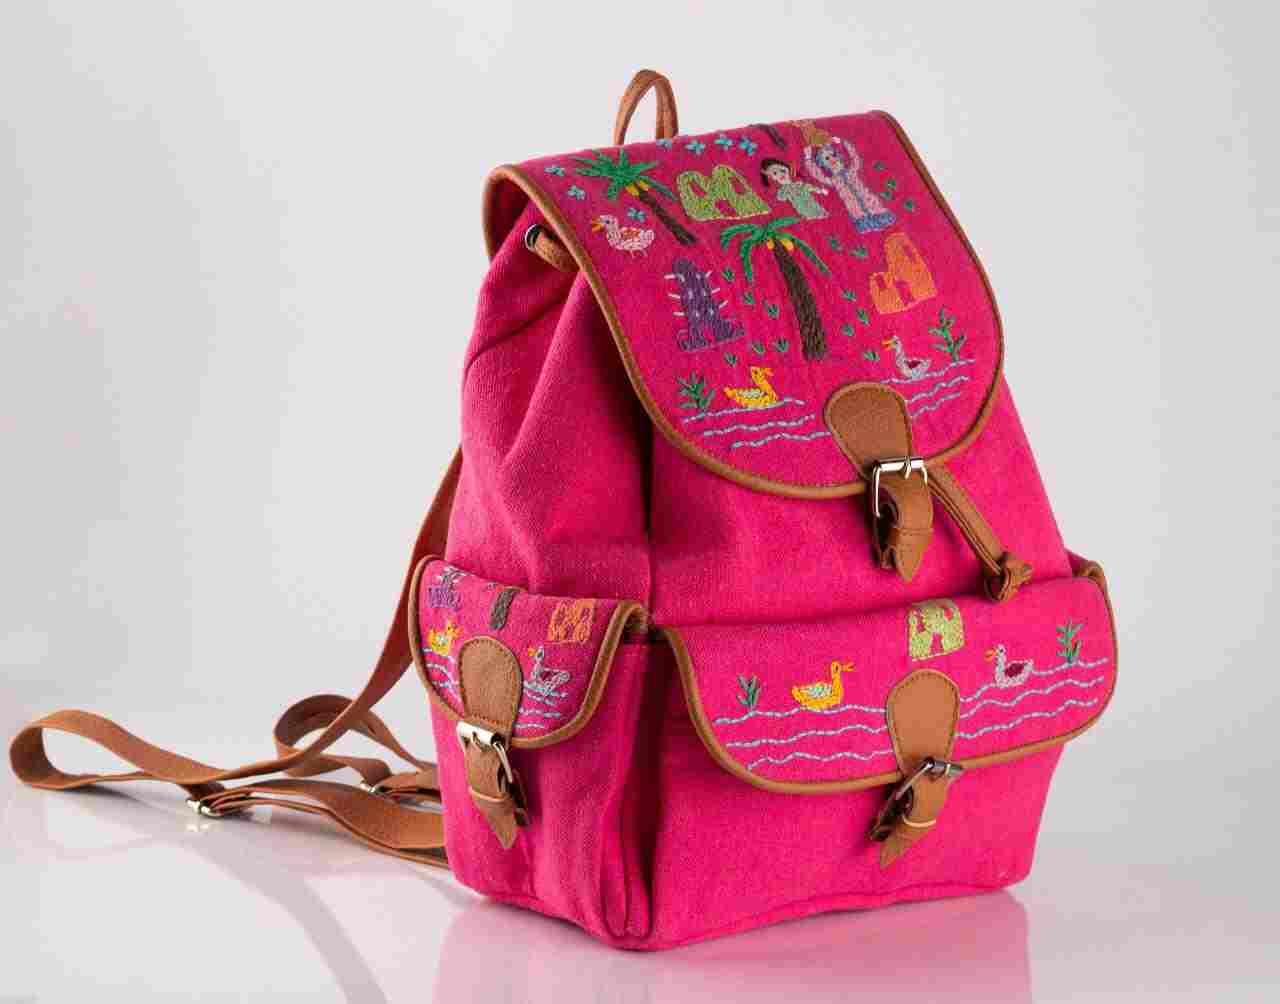 A hand-embroidered backpack, cotton cloth